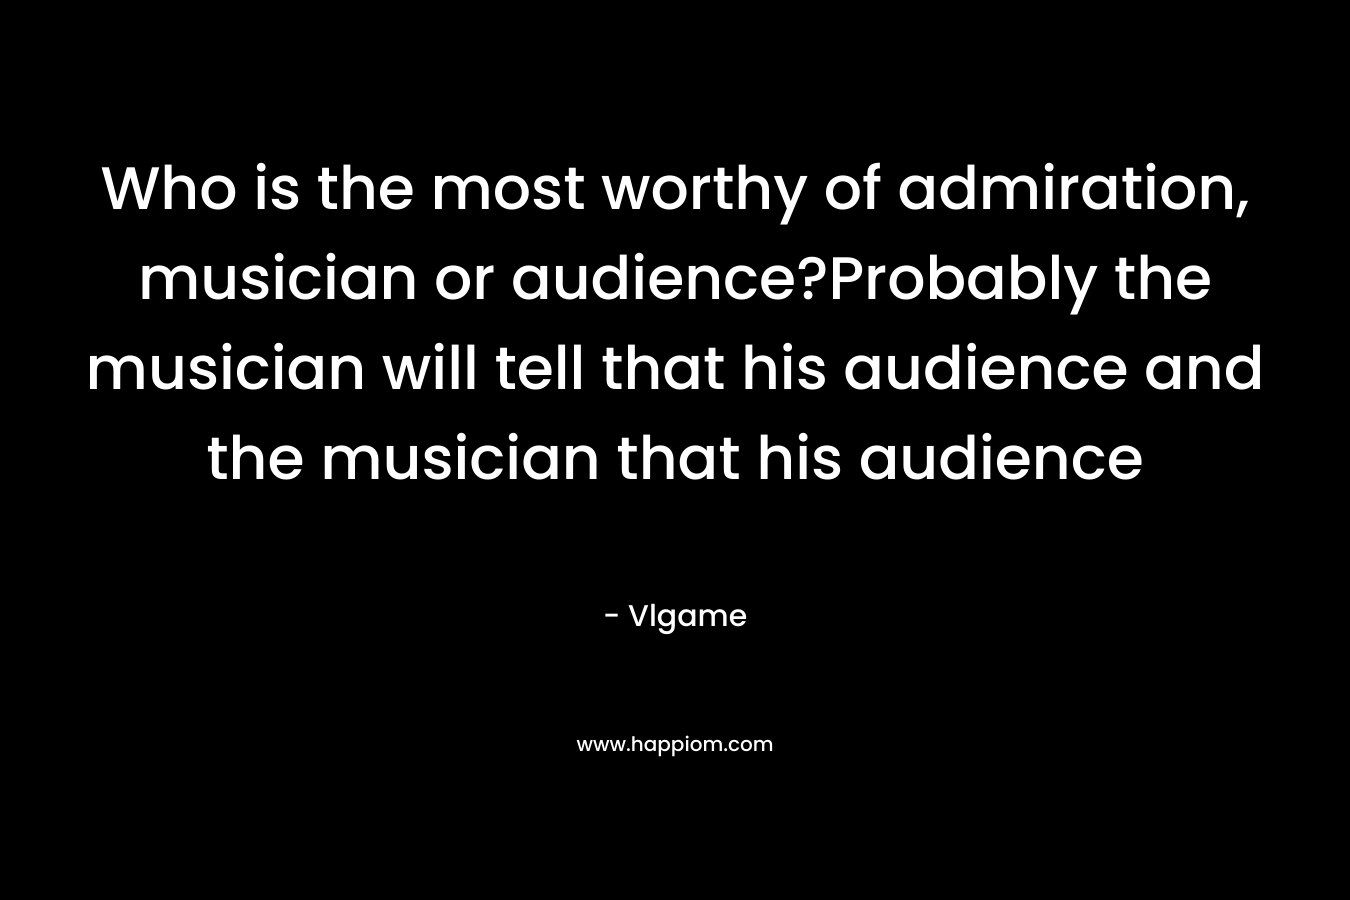 Who is the most worthy of admiration, musician or audience?Probably the musician will tell that his audience and the musician that his audience